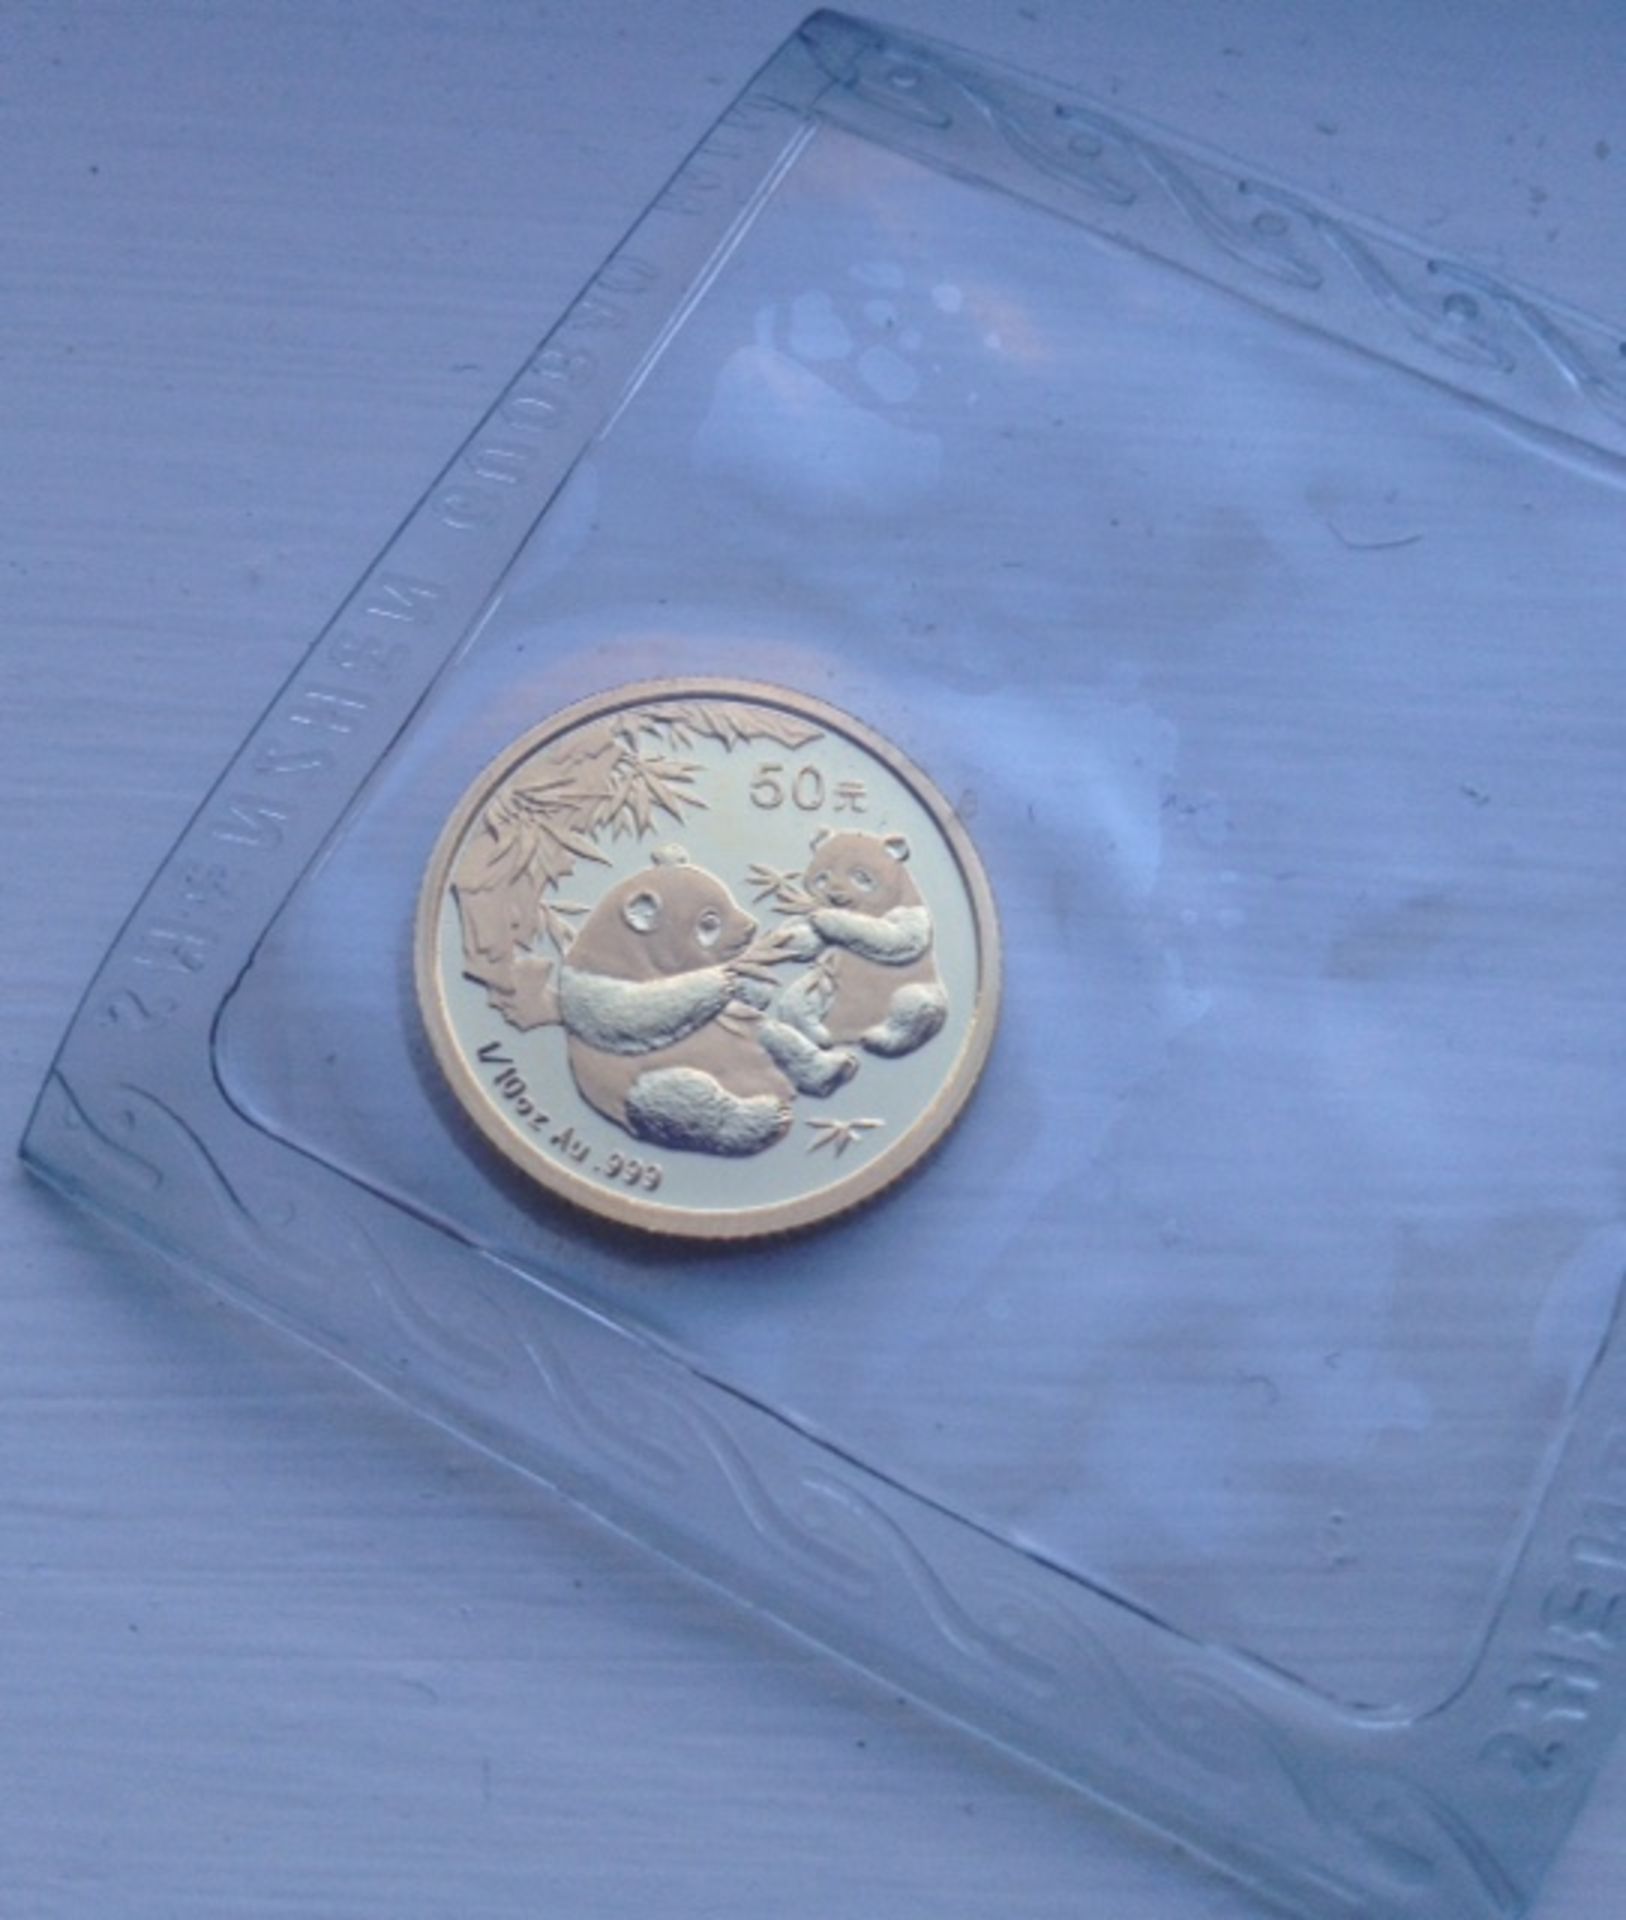 No Reserve Ultra rare collectors 2006 1/10oz Gold 50 yuan Chinese Coin fully Sealed - Image 3 of 4